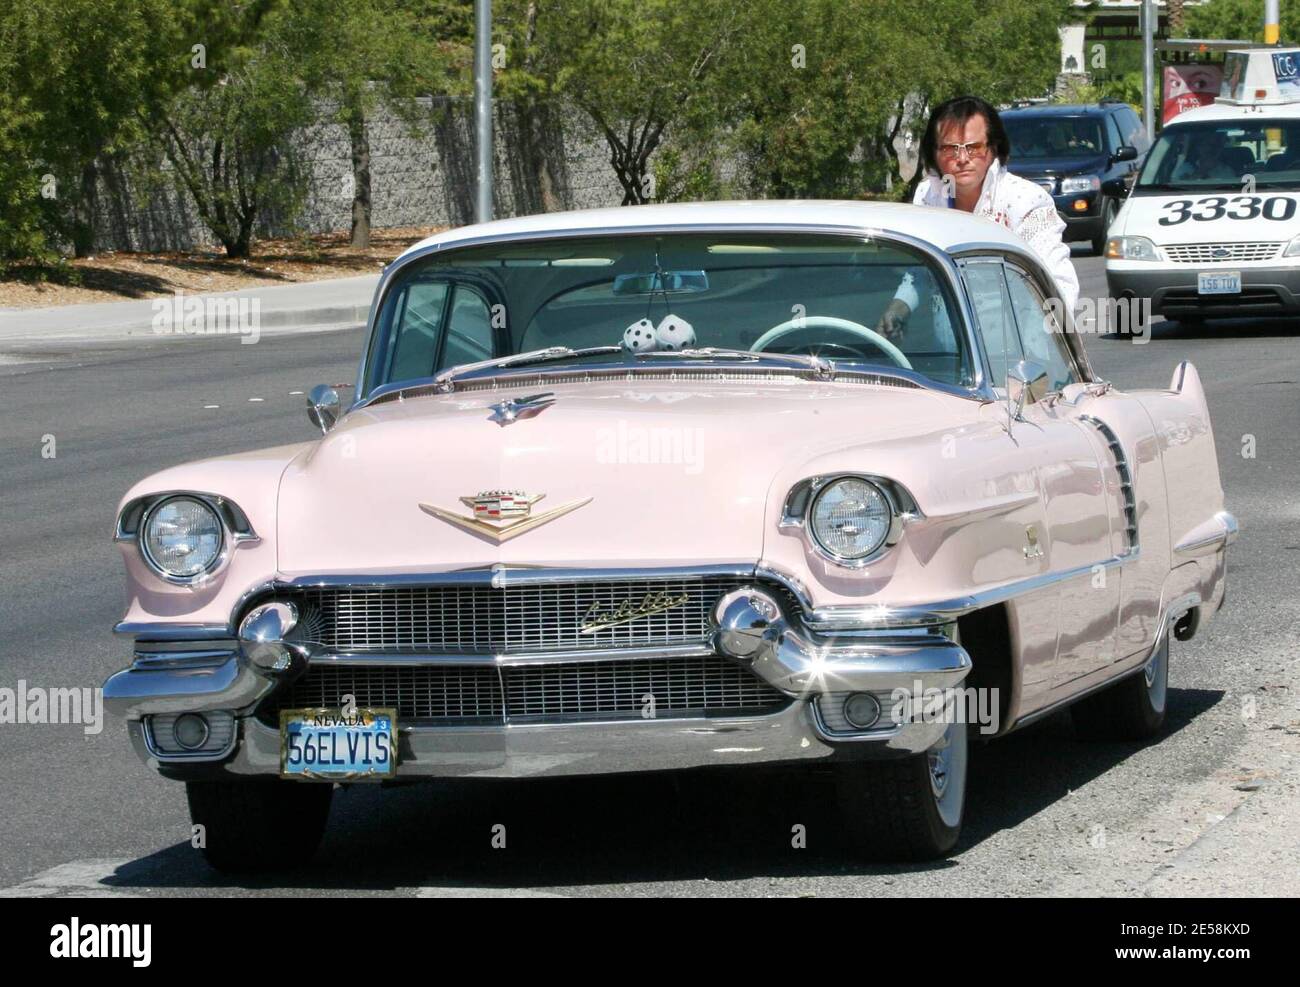 Exclusive!! The King takes some time out from eternity to help out with a wedding on the Las Vegas Strip. This Elvis impersonator takes his craft seriously, right down to his 1956 Cadillac with a 56ELVIS license plate. Las Vegas, NV. 9/12/07.   [[tag]] Stock Photo